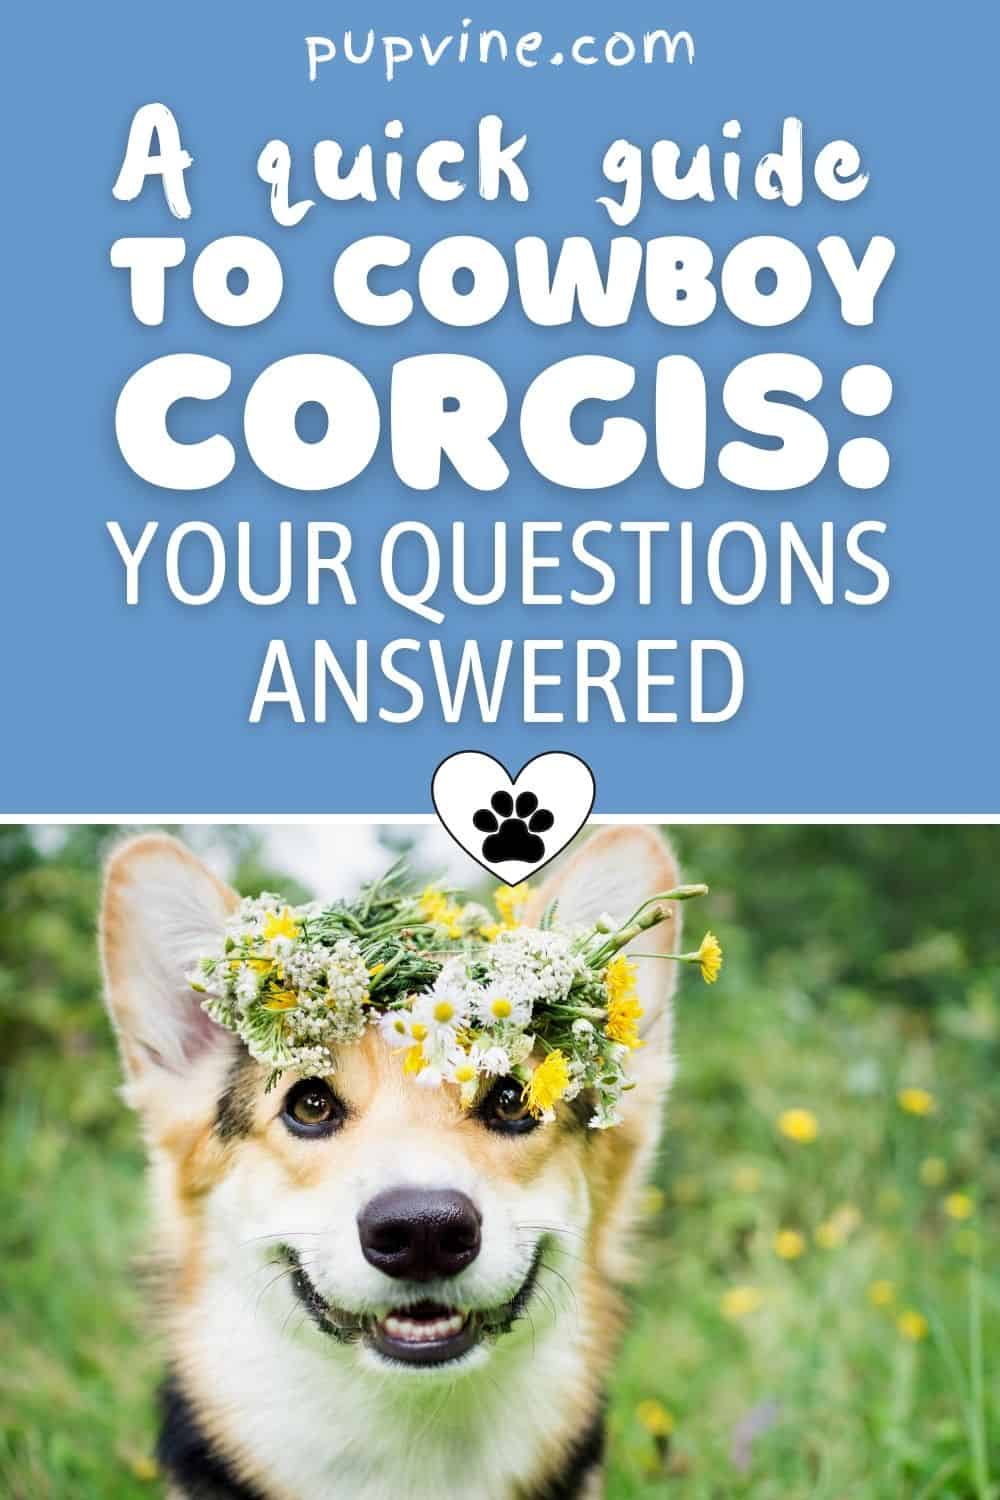 A Quick Guide To Cowboy Corgis: Your Questions Answered